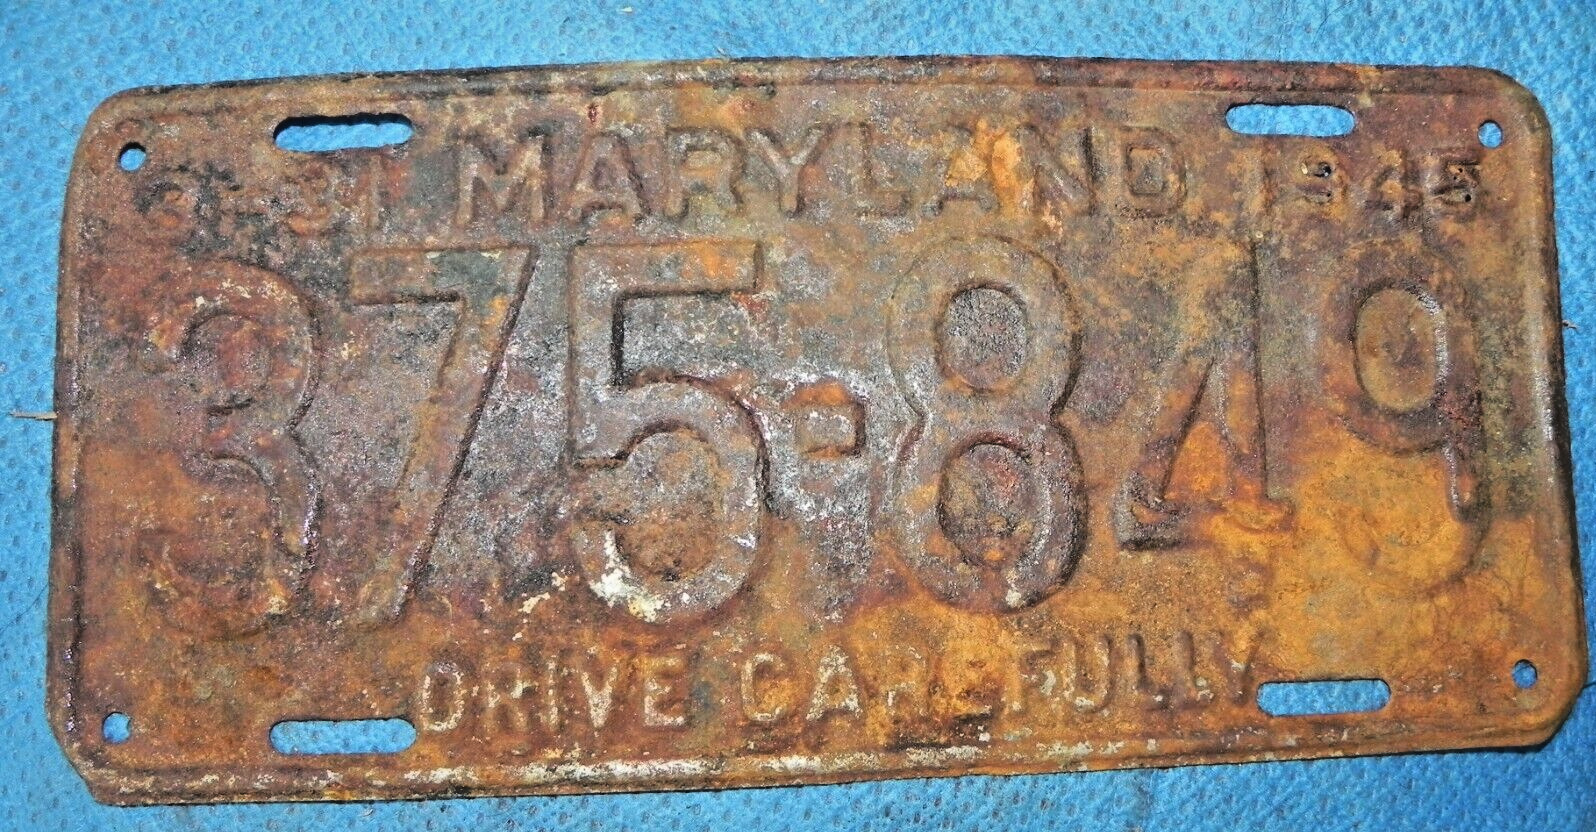 VINTAGE - 1945 Maryland License Plate #375-849 - SOLID BUT RUSTY \